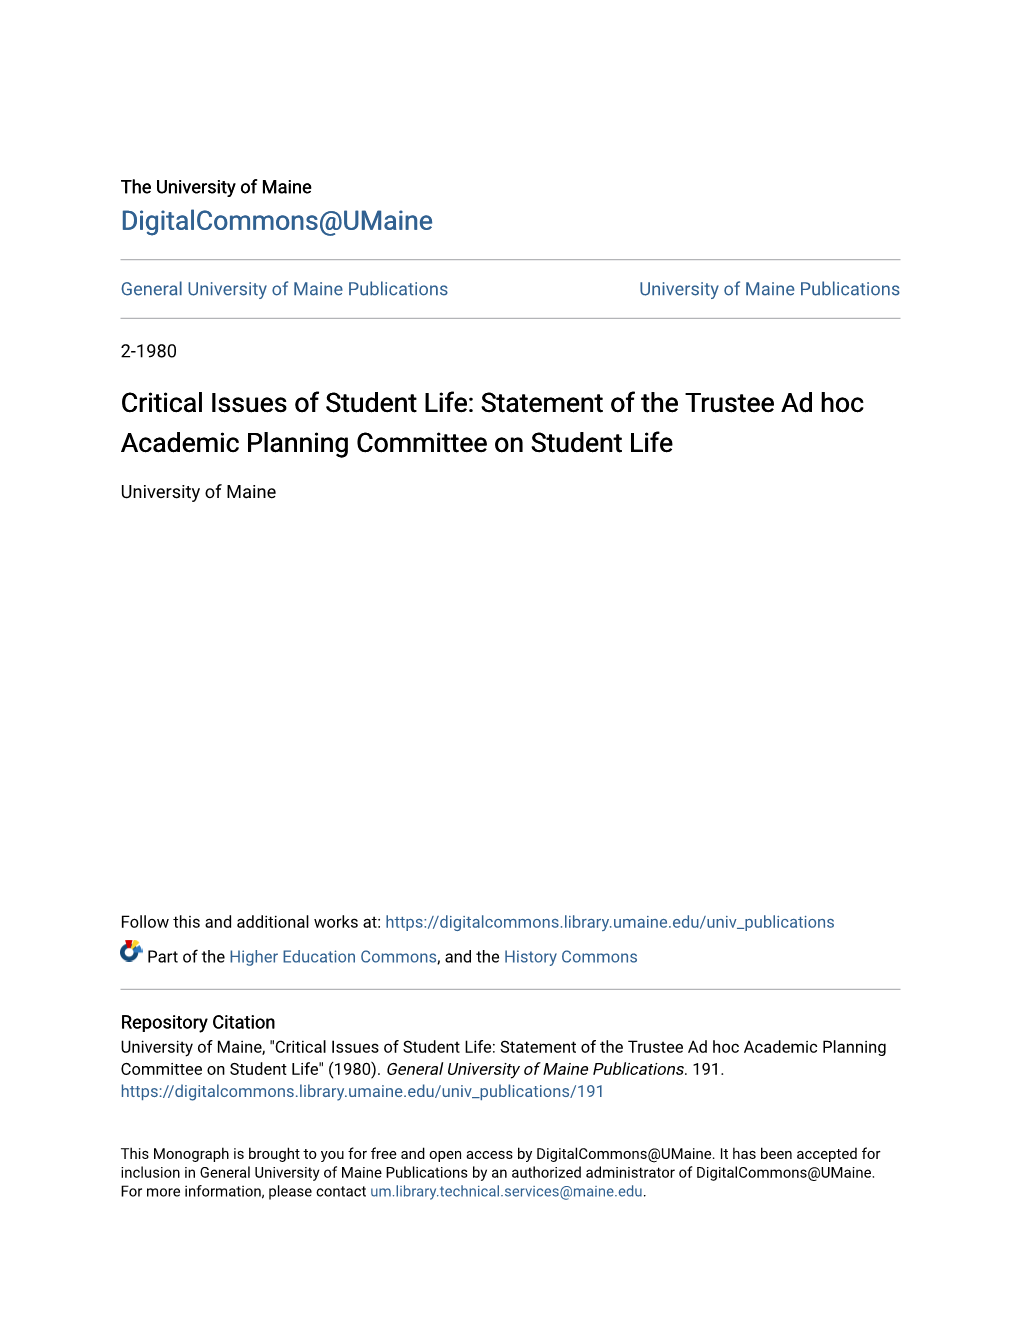 Statement of the Trustee Ad Hoc Academic Planning Committee on Student Life